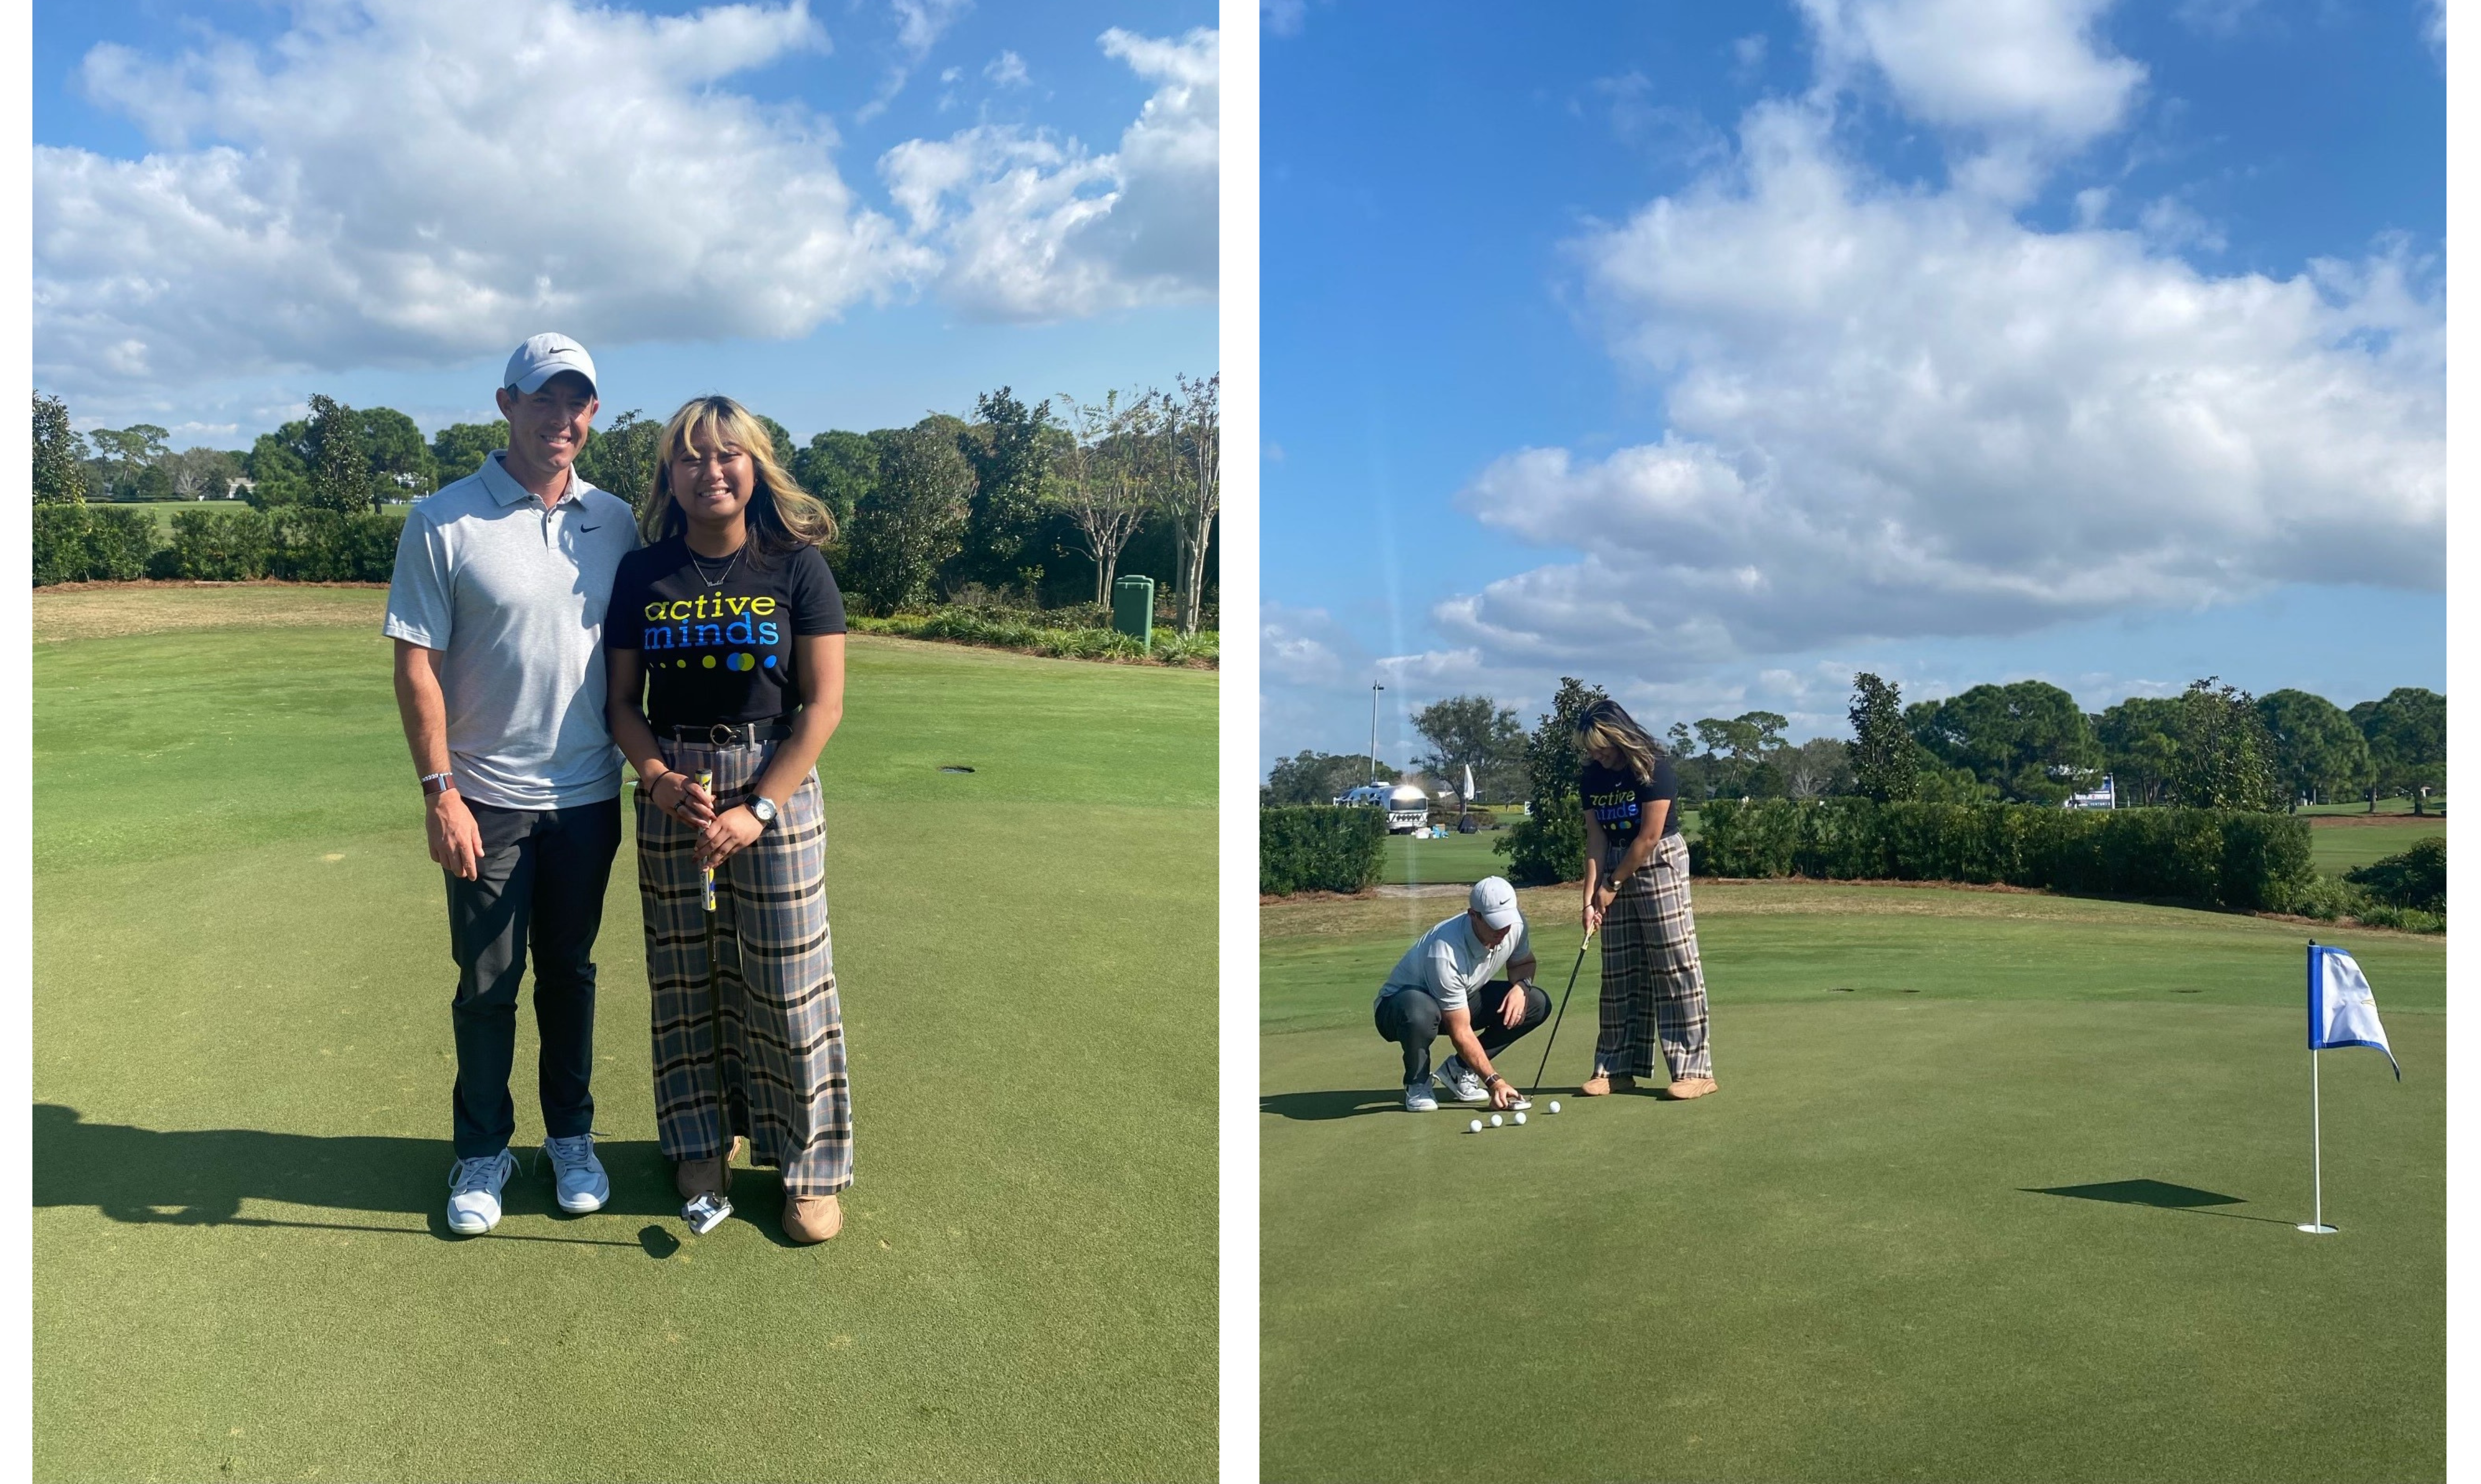 Photos of Rory McIlroy and Geela Margo Ramos practicing putting.